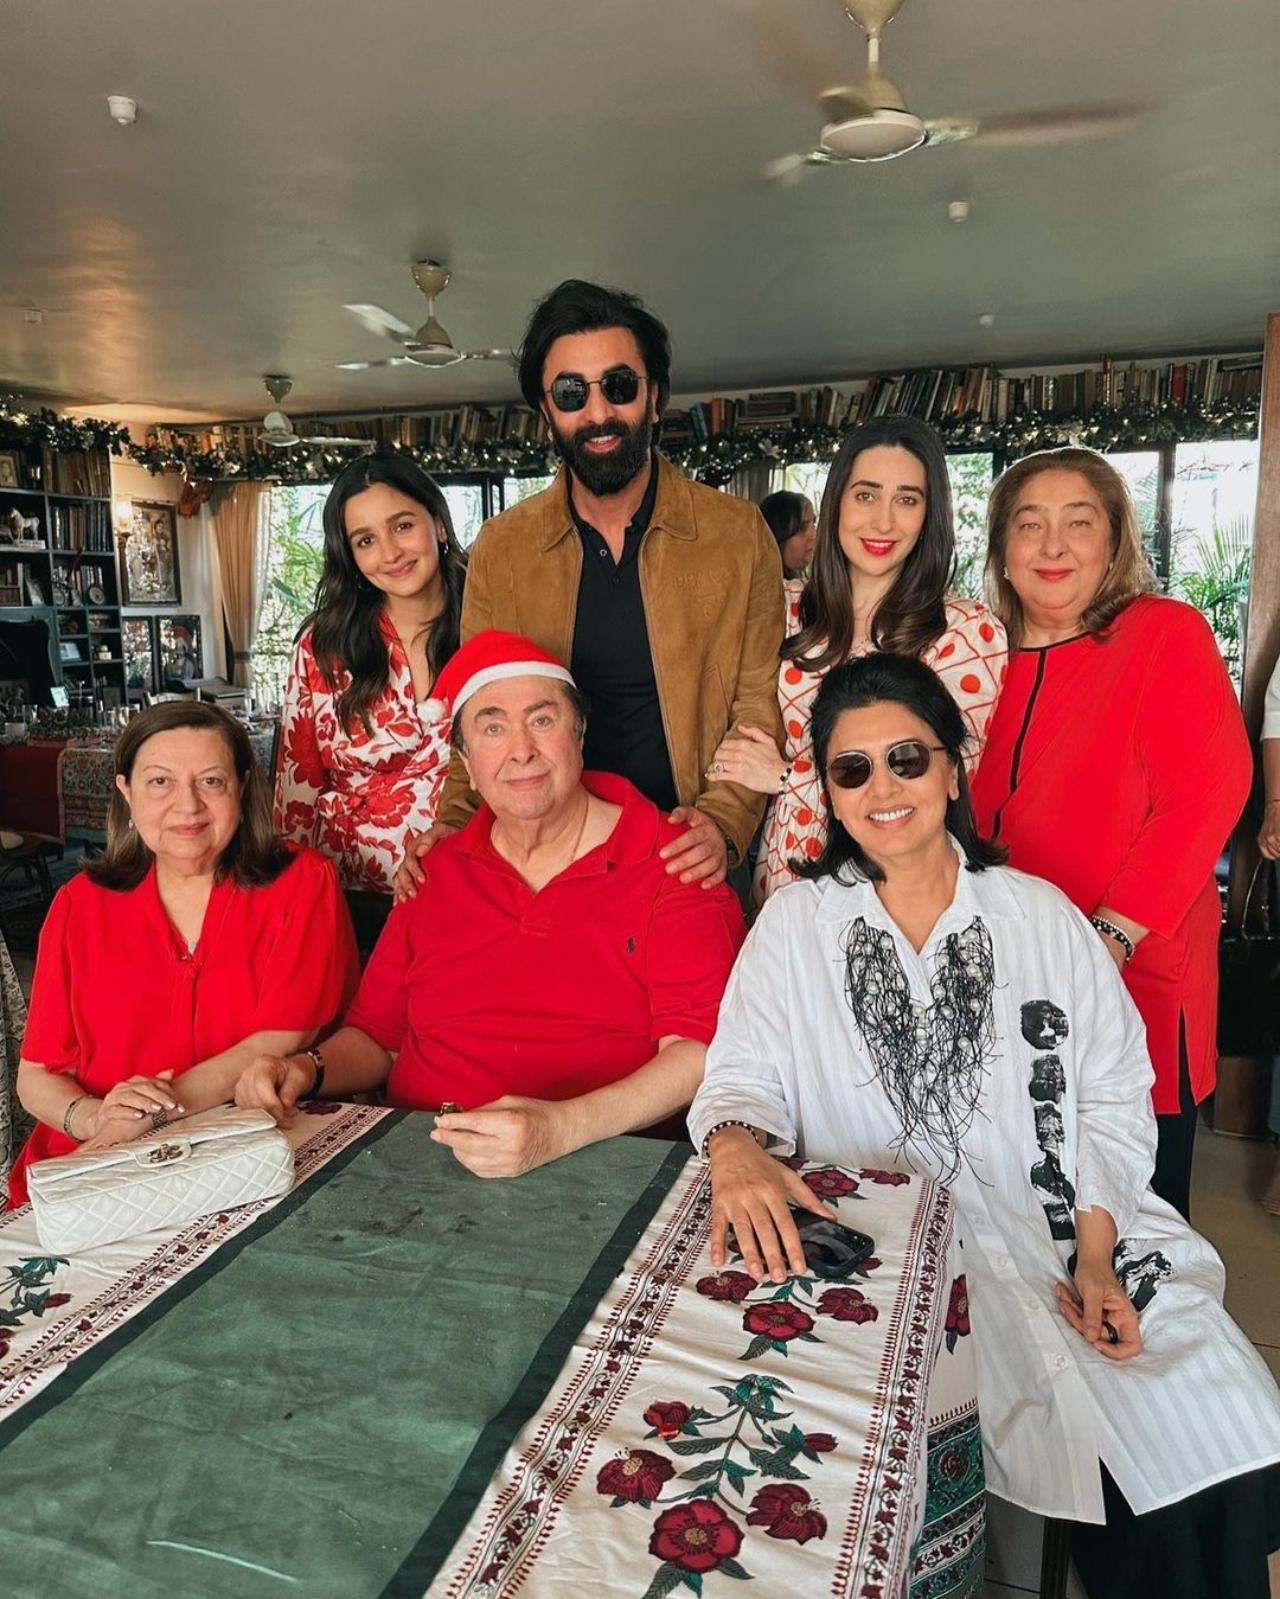 In another picture, Alia shared a snap from the Kapoor family's annual Christmas lunch in which she could be seen with Ranbir, Karisma Kapoor, Randhir Kapoor, Neetu Kapoor, Reema Kapoor and Babita